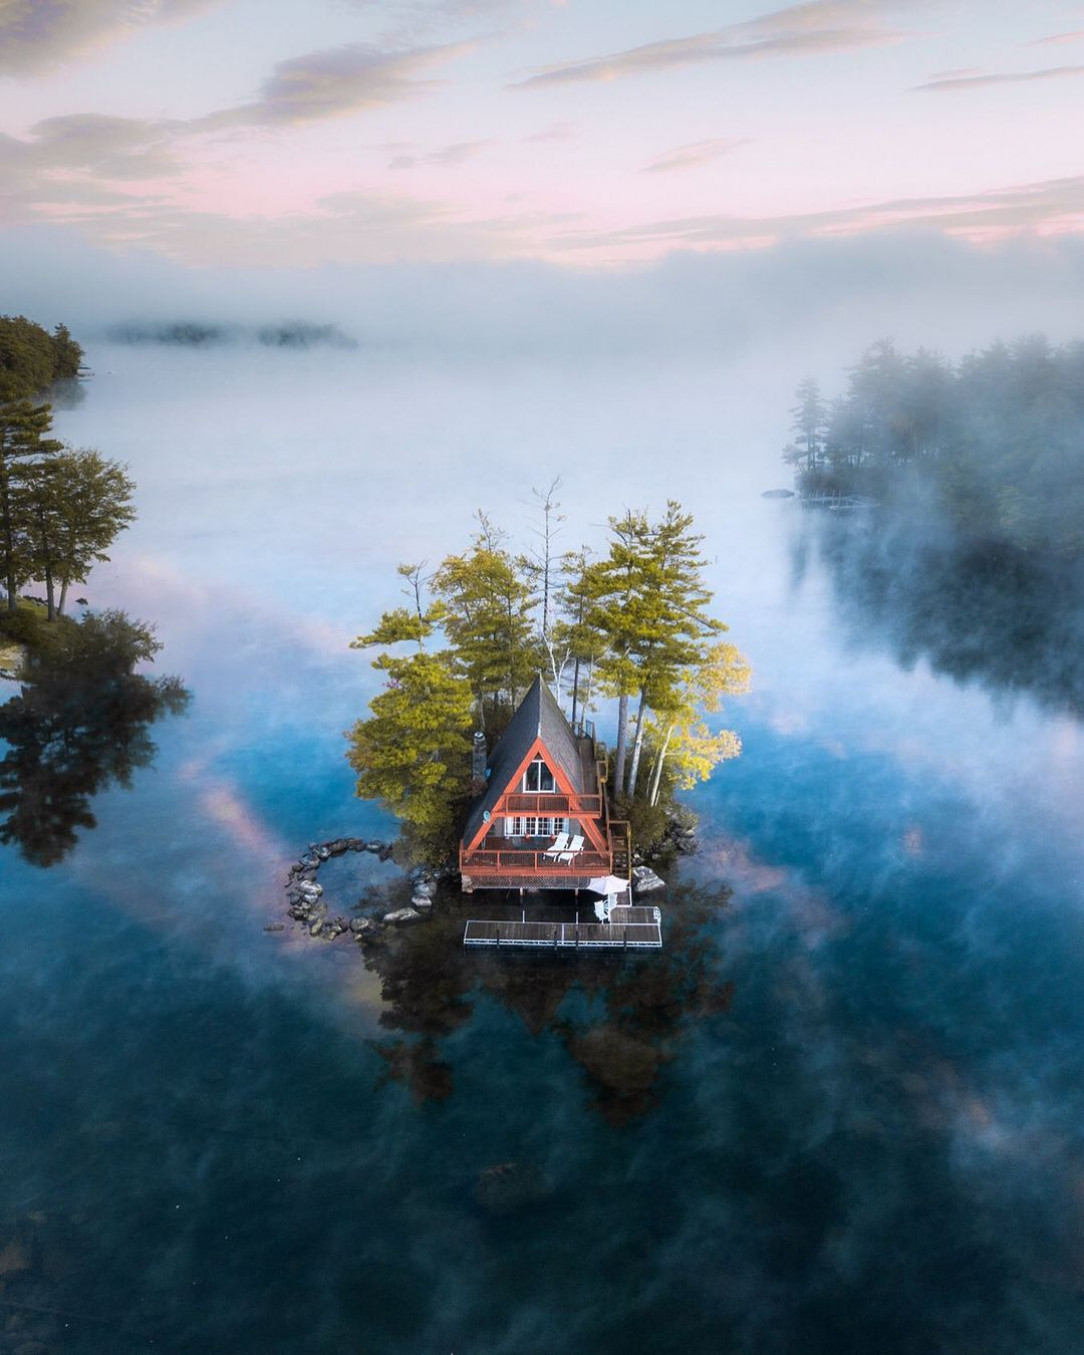 A cabin on the water